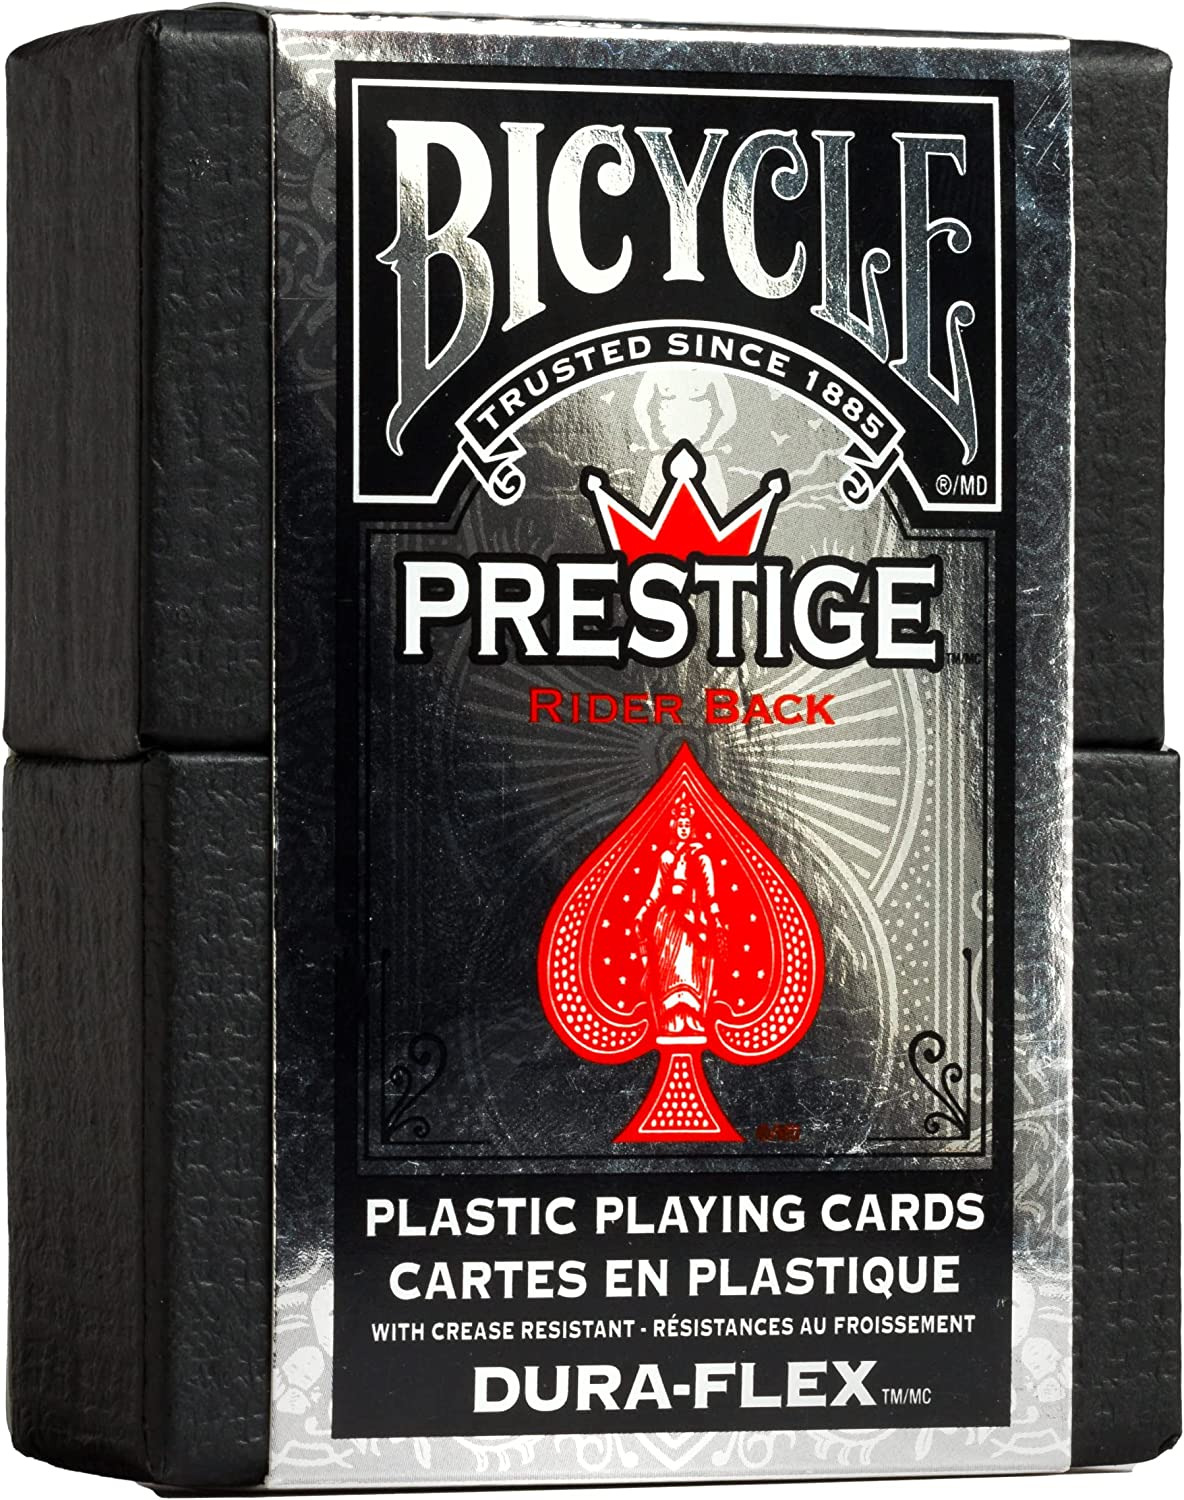 Bicycle Prestige Waterproof Plastic Playing Cards, Red & Blue (Colors May Vary)